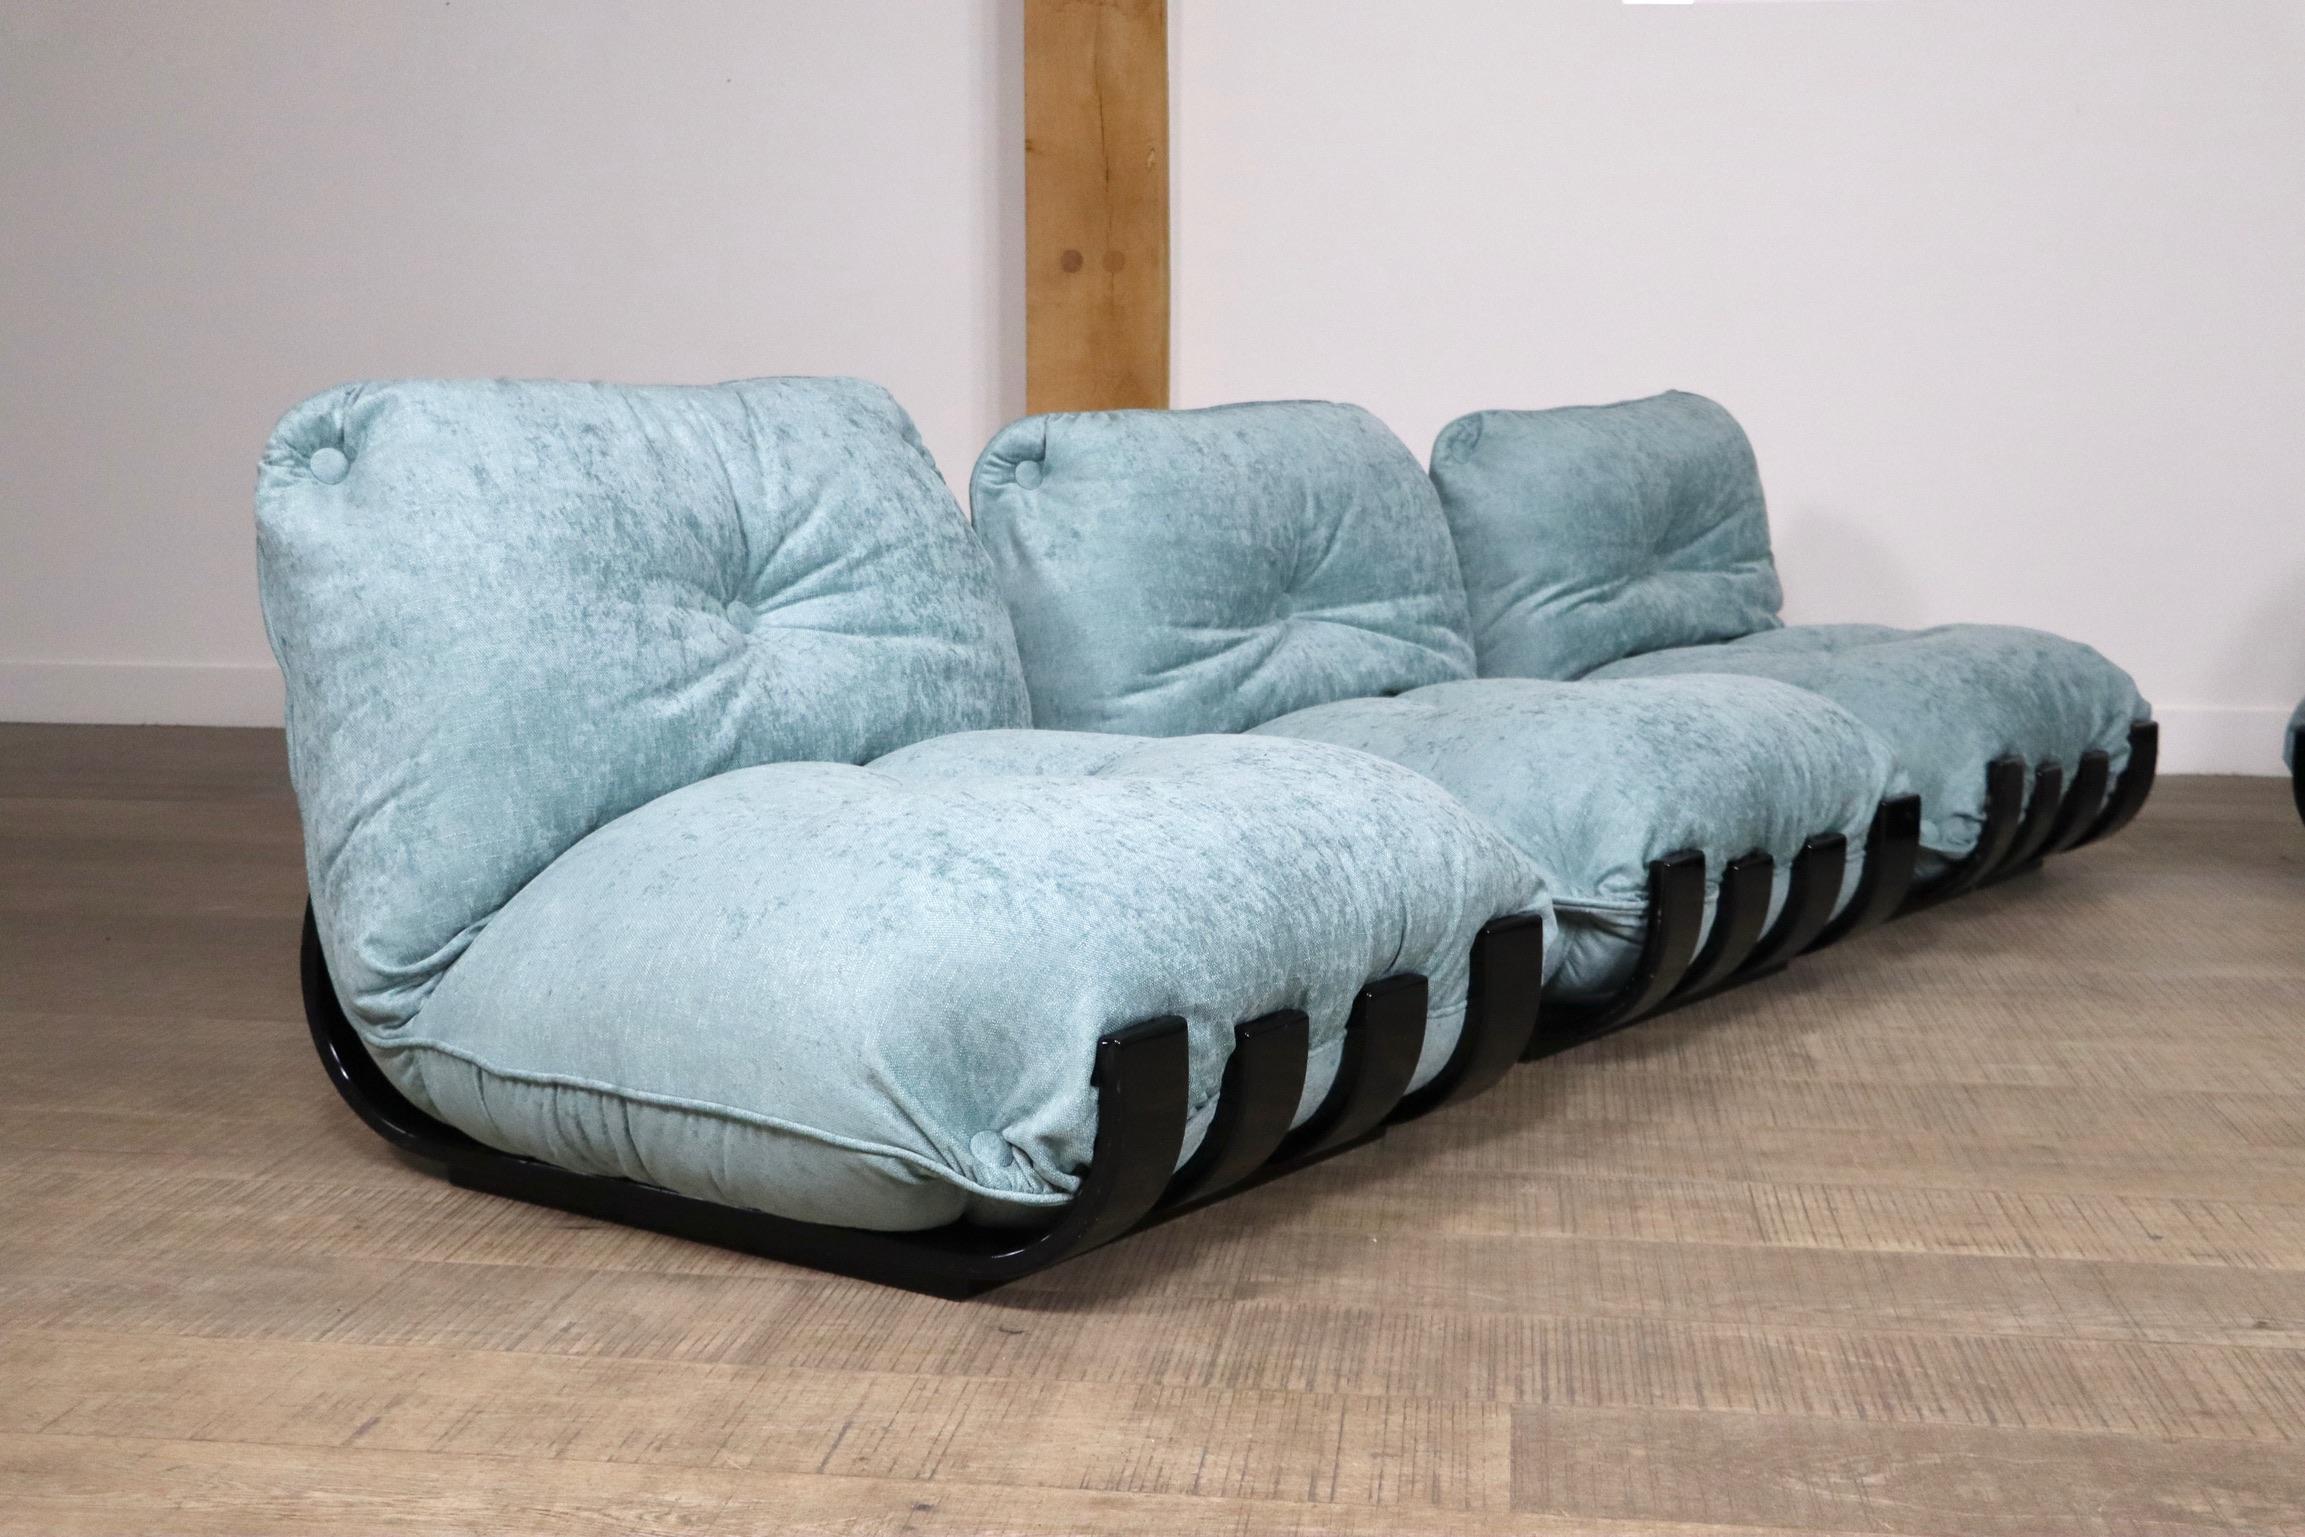 Sectional Gran Visir Sofa in Blue Velvet by Luciano Frigerio, Italy, 1970s For Sale 2